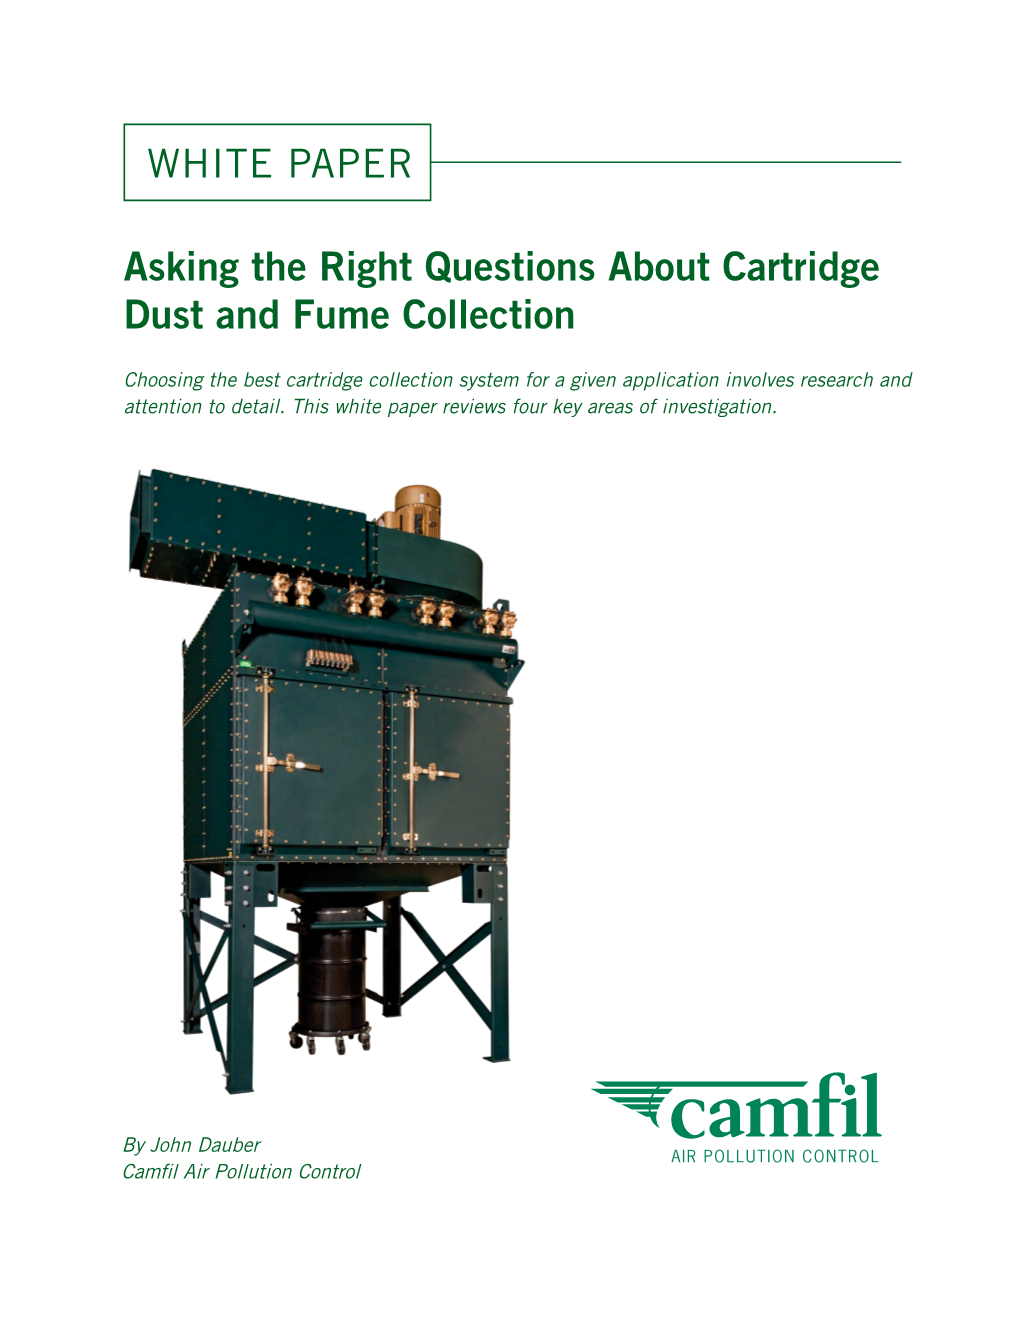 Asking the Right Questions About Cartridge Dust and Fume Collection